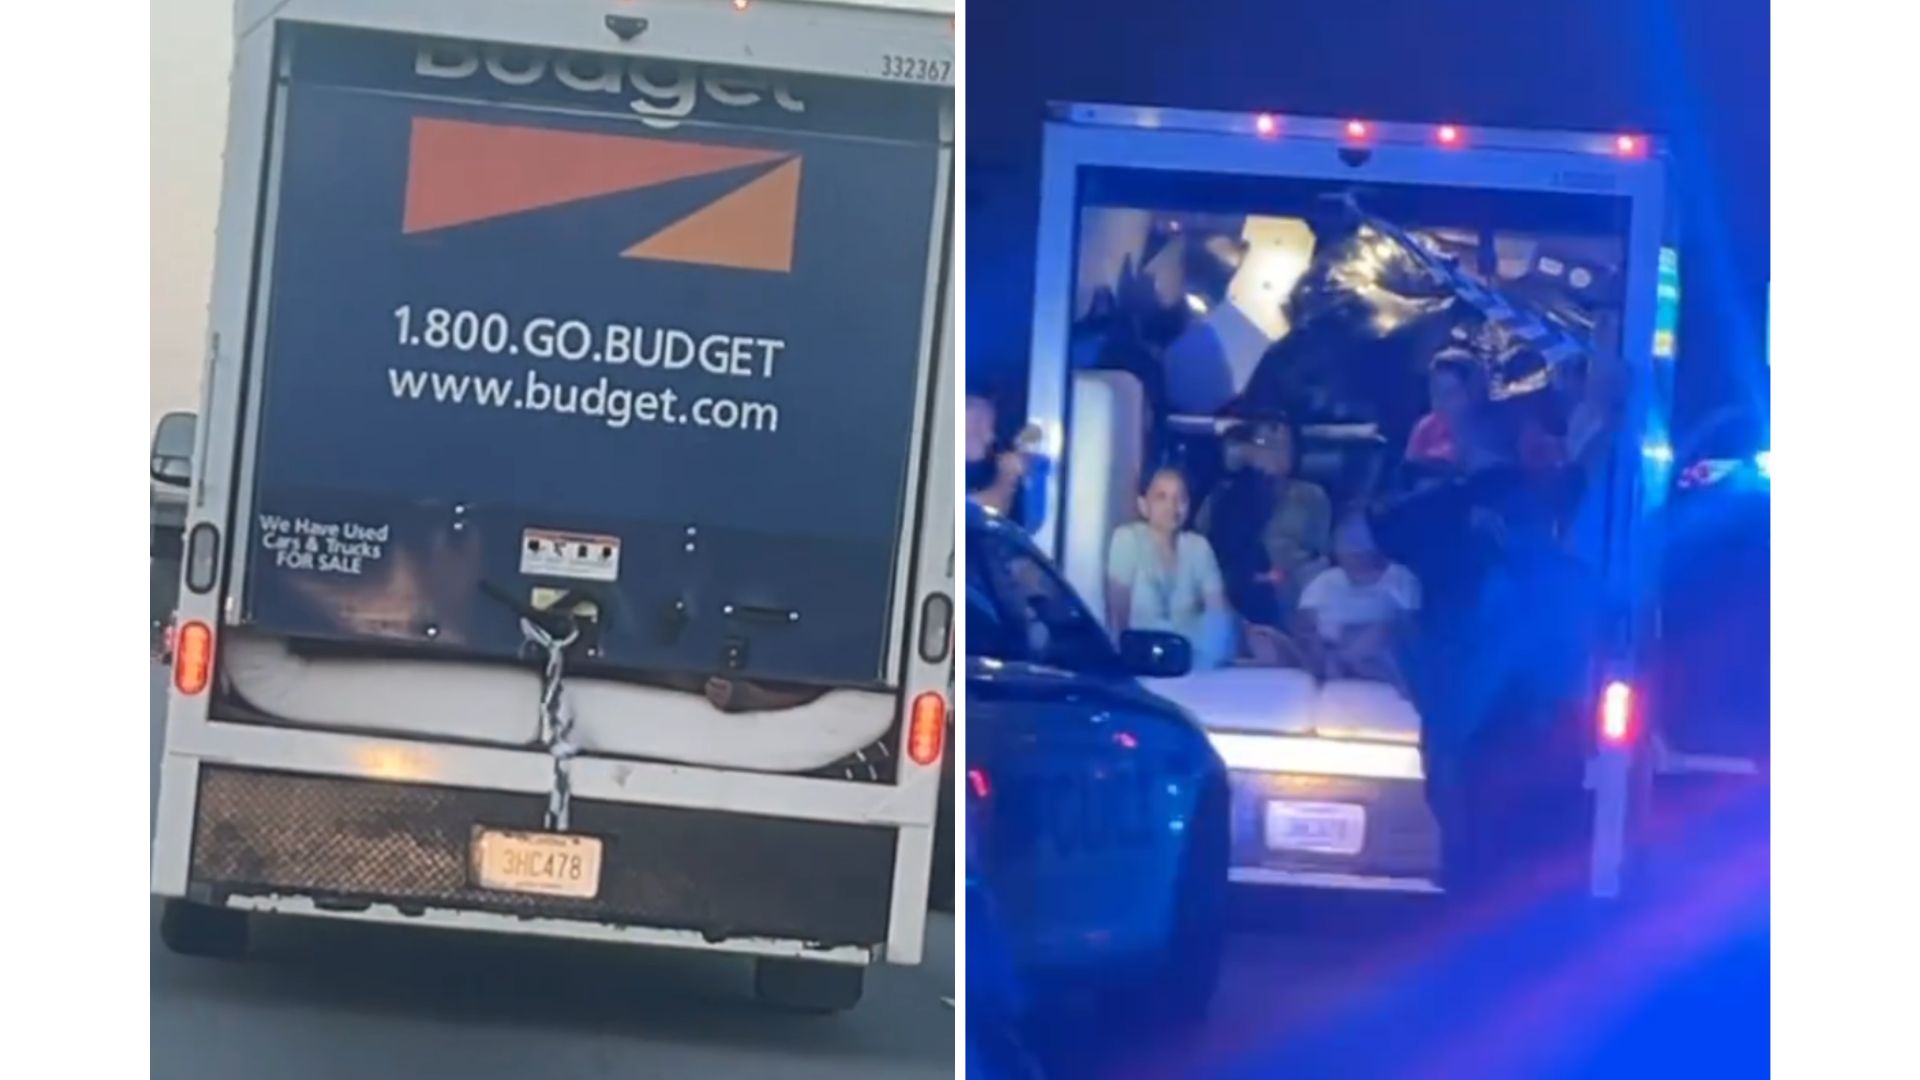 Box Truck Packed with People Was Not Engaged in Human Trafficking: Police – Newsweek